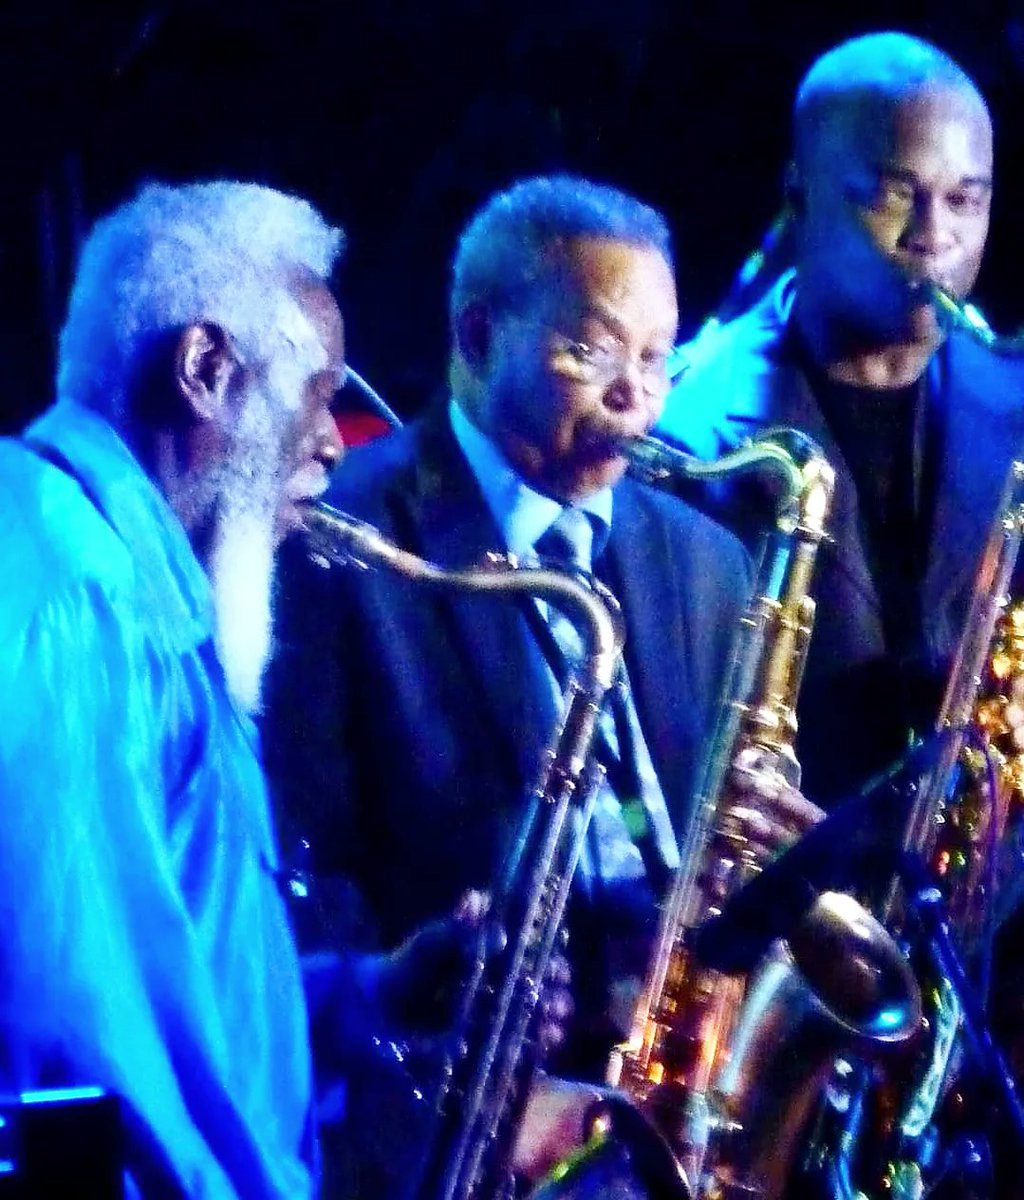 Happy 83rd Birth Anniversary to #jazz #saxophonist/#clarinetist/#bandleader #OdeanPope with #saxophonists #PharoahSanders left & #JamesCarter right!!

#saxplayers #saxophone #saxophonechoir #blues #sax #saxophoneplayer #horn #saxophoneplayers #clarinet #saxplayer #clarinetplayer